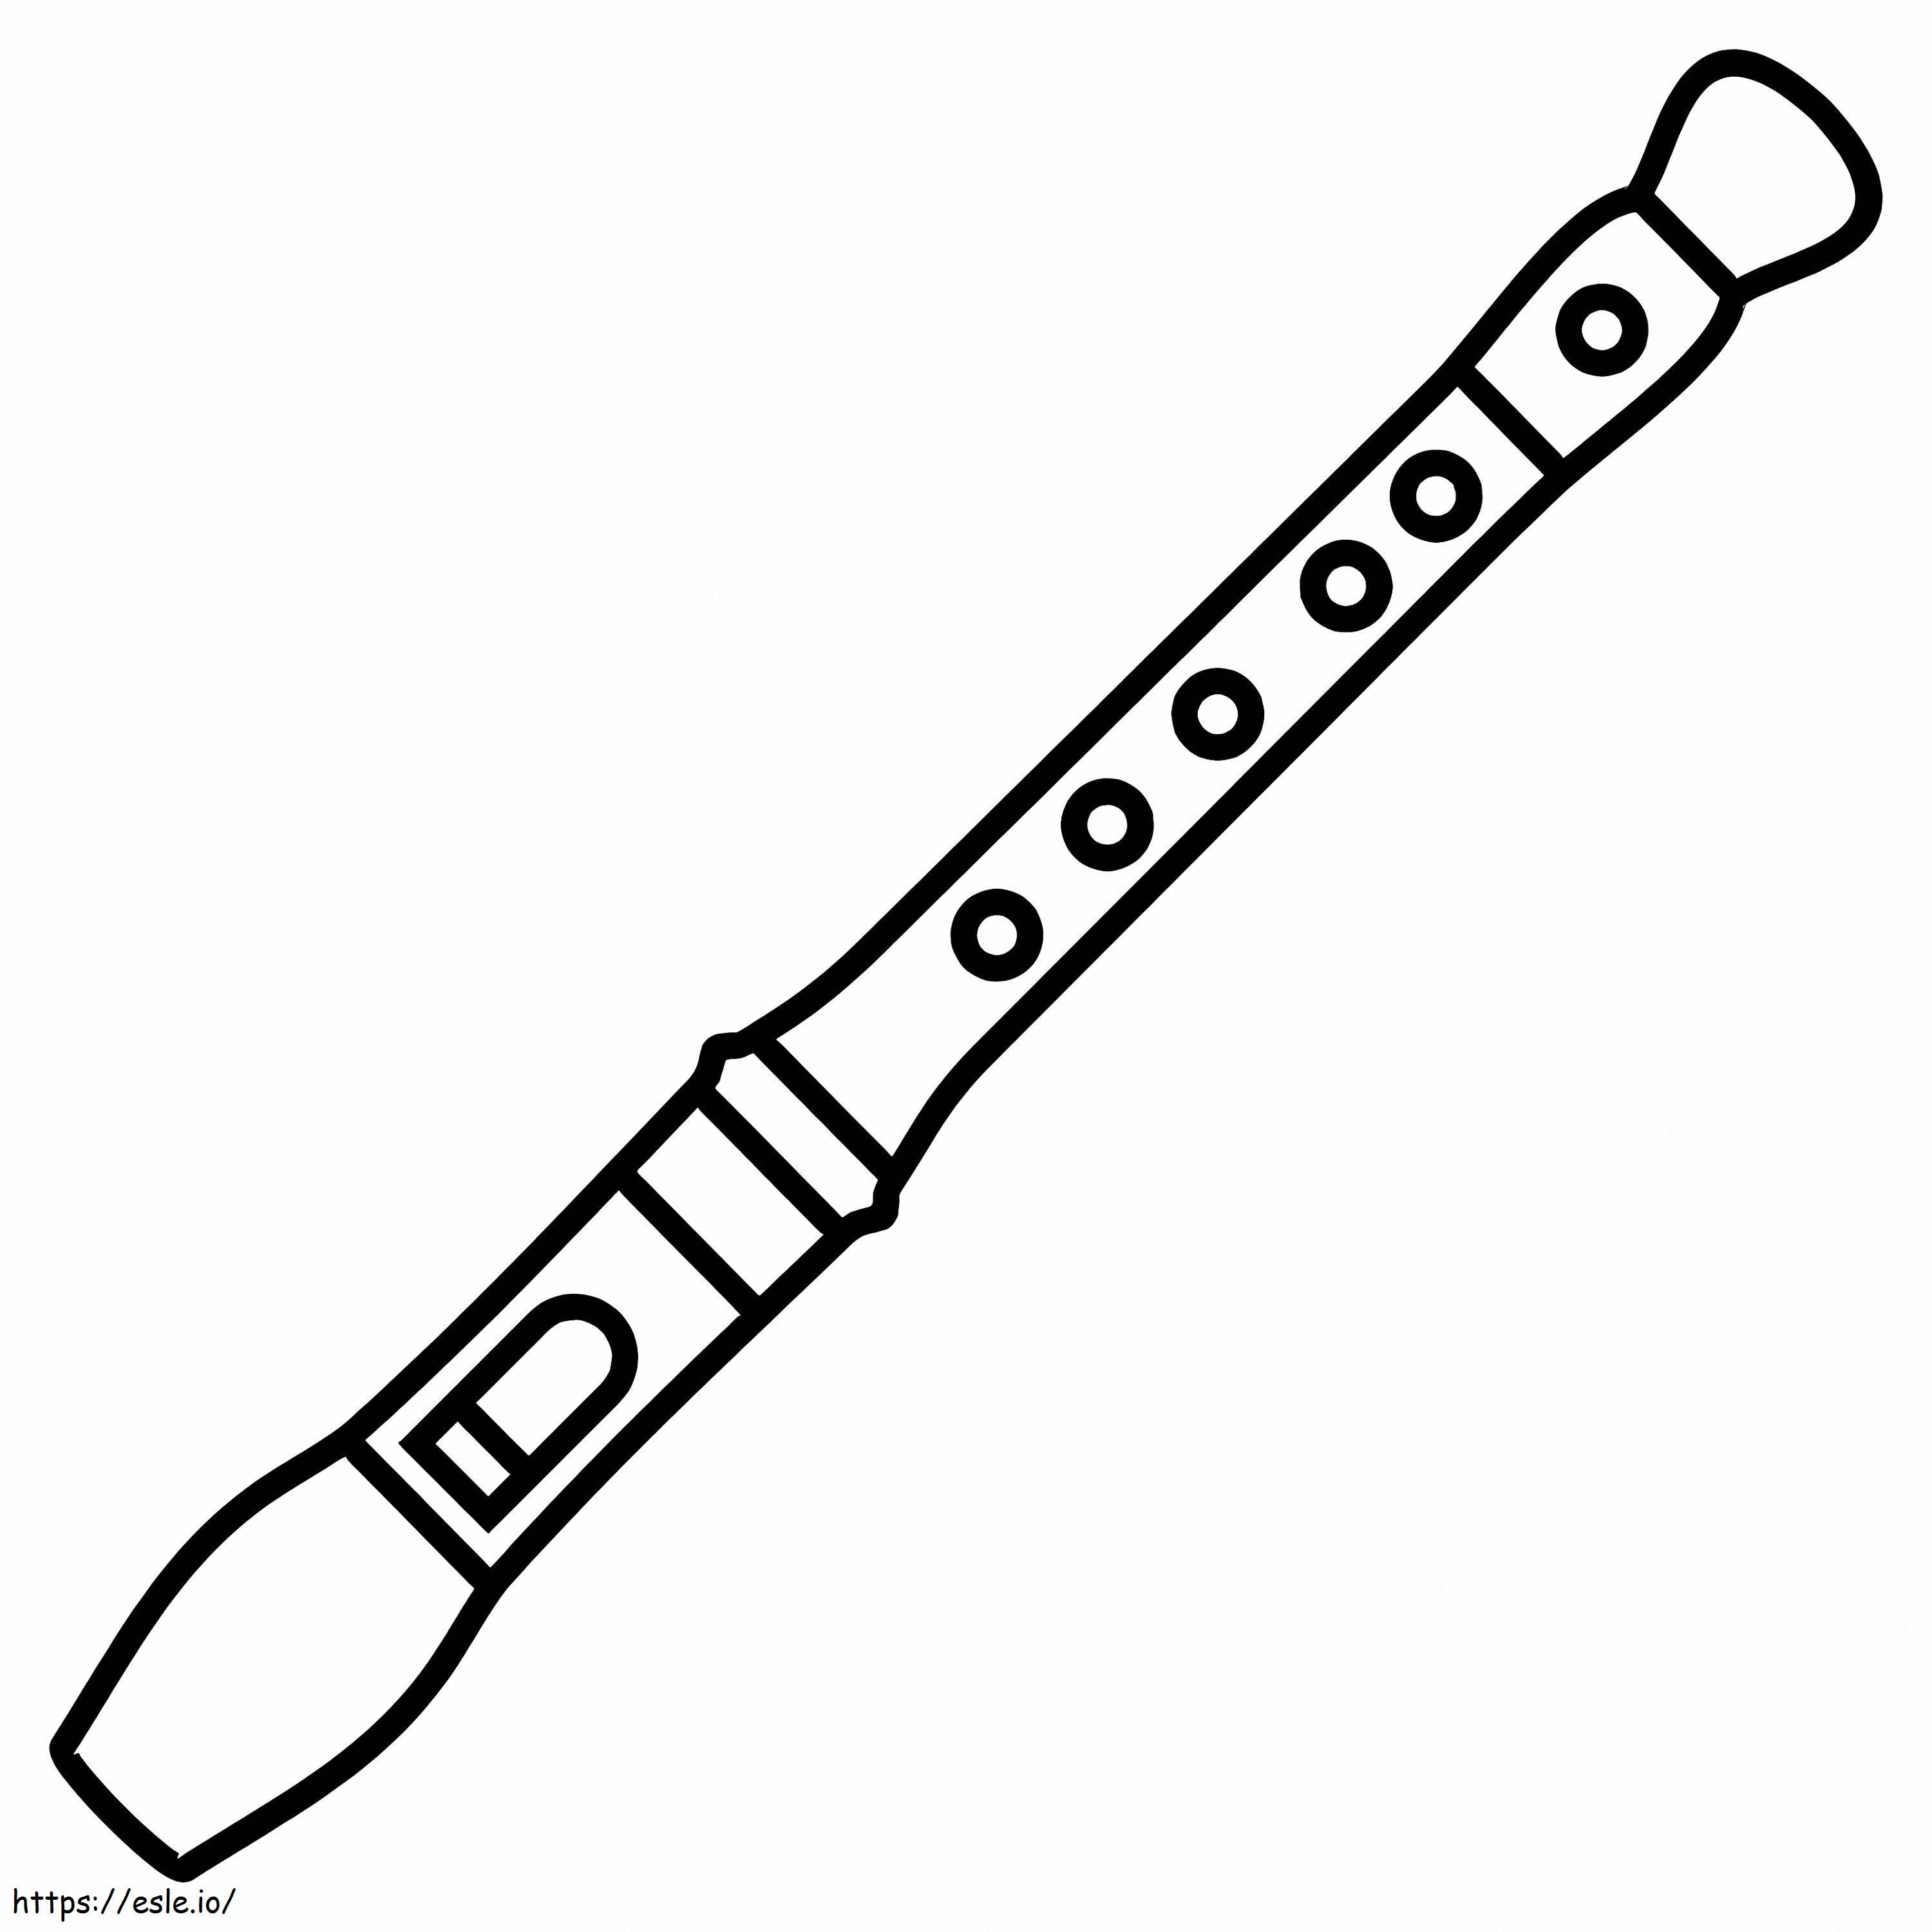 Simple Flute 2 coloring page